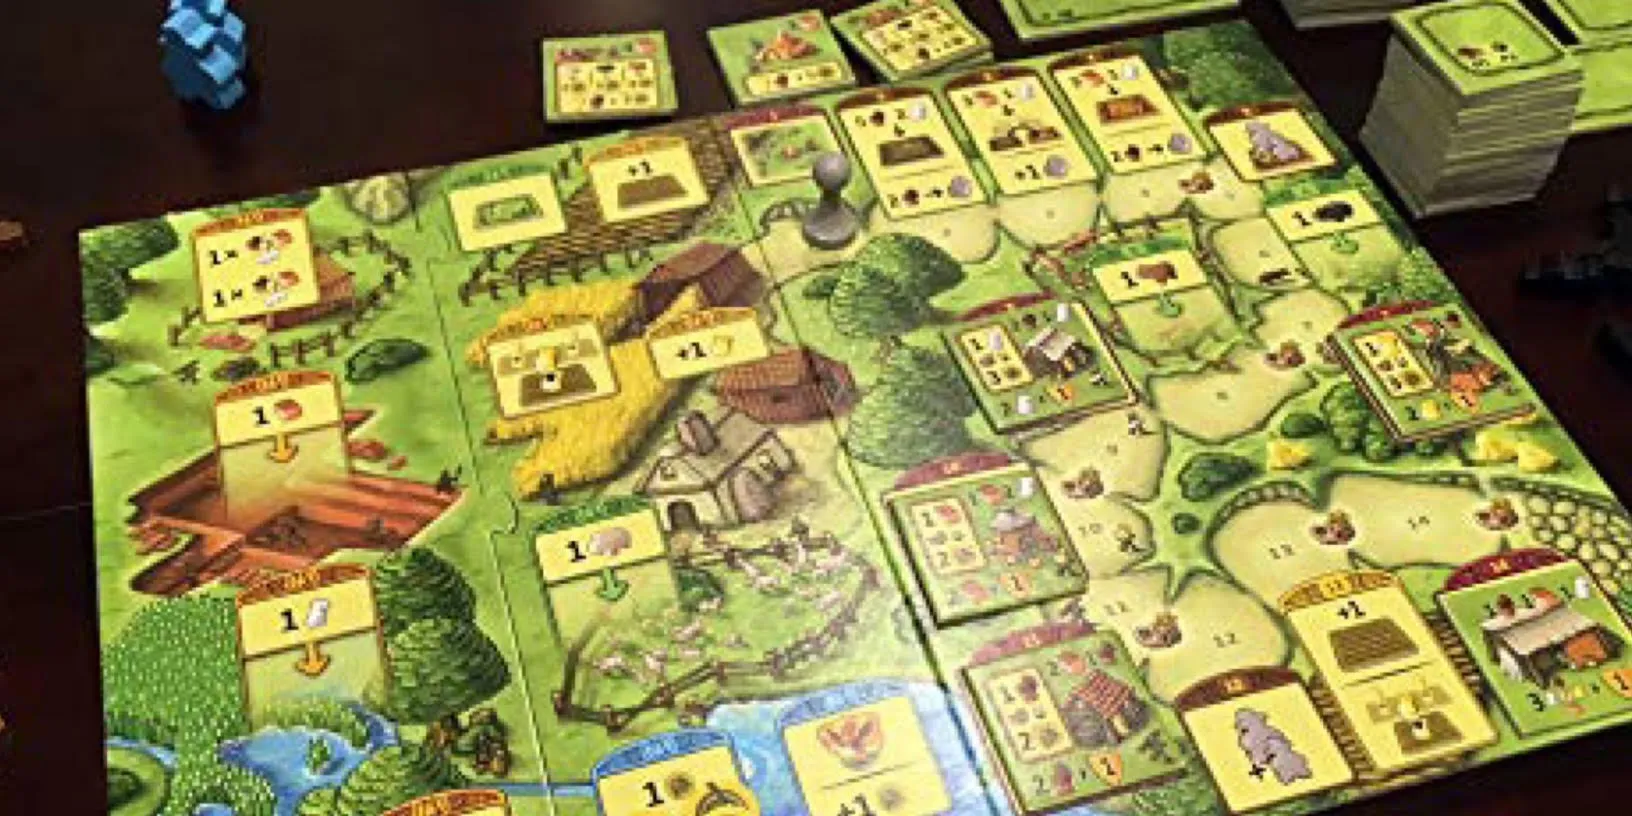 Agricola board game